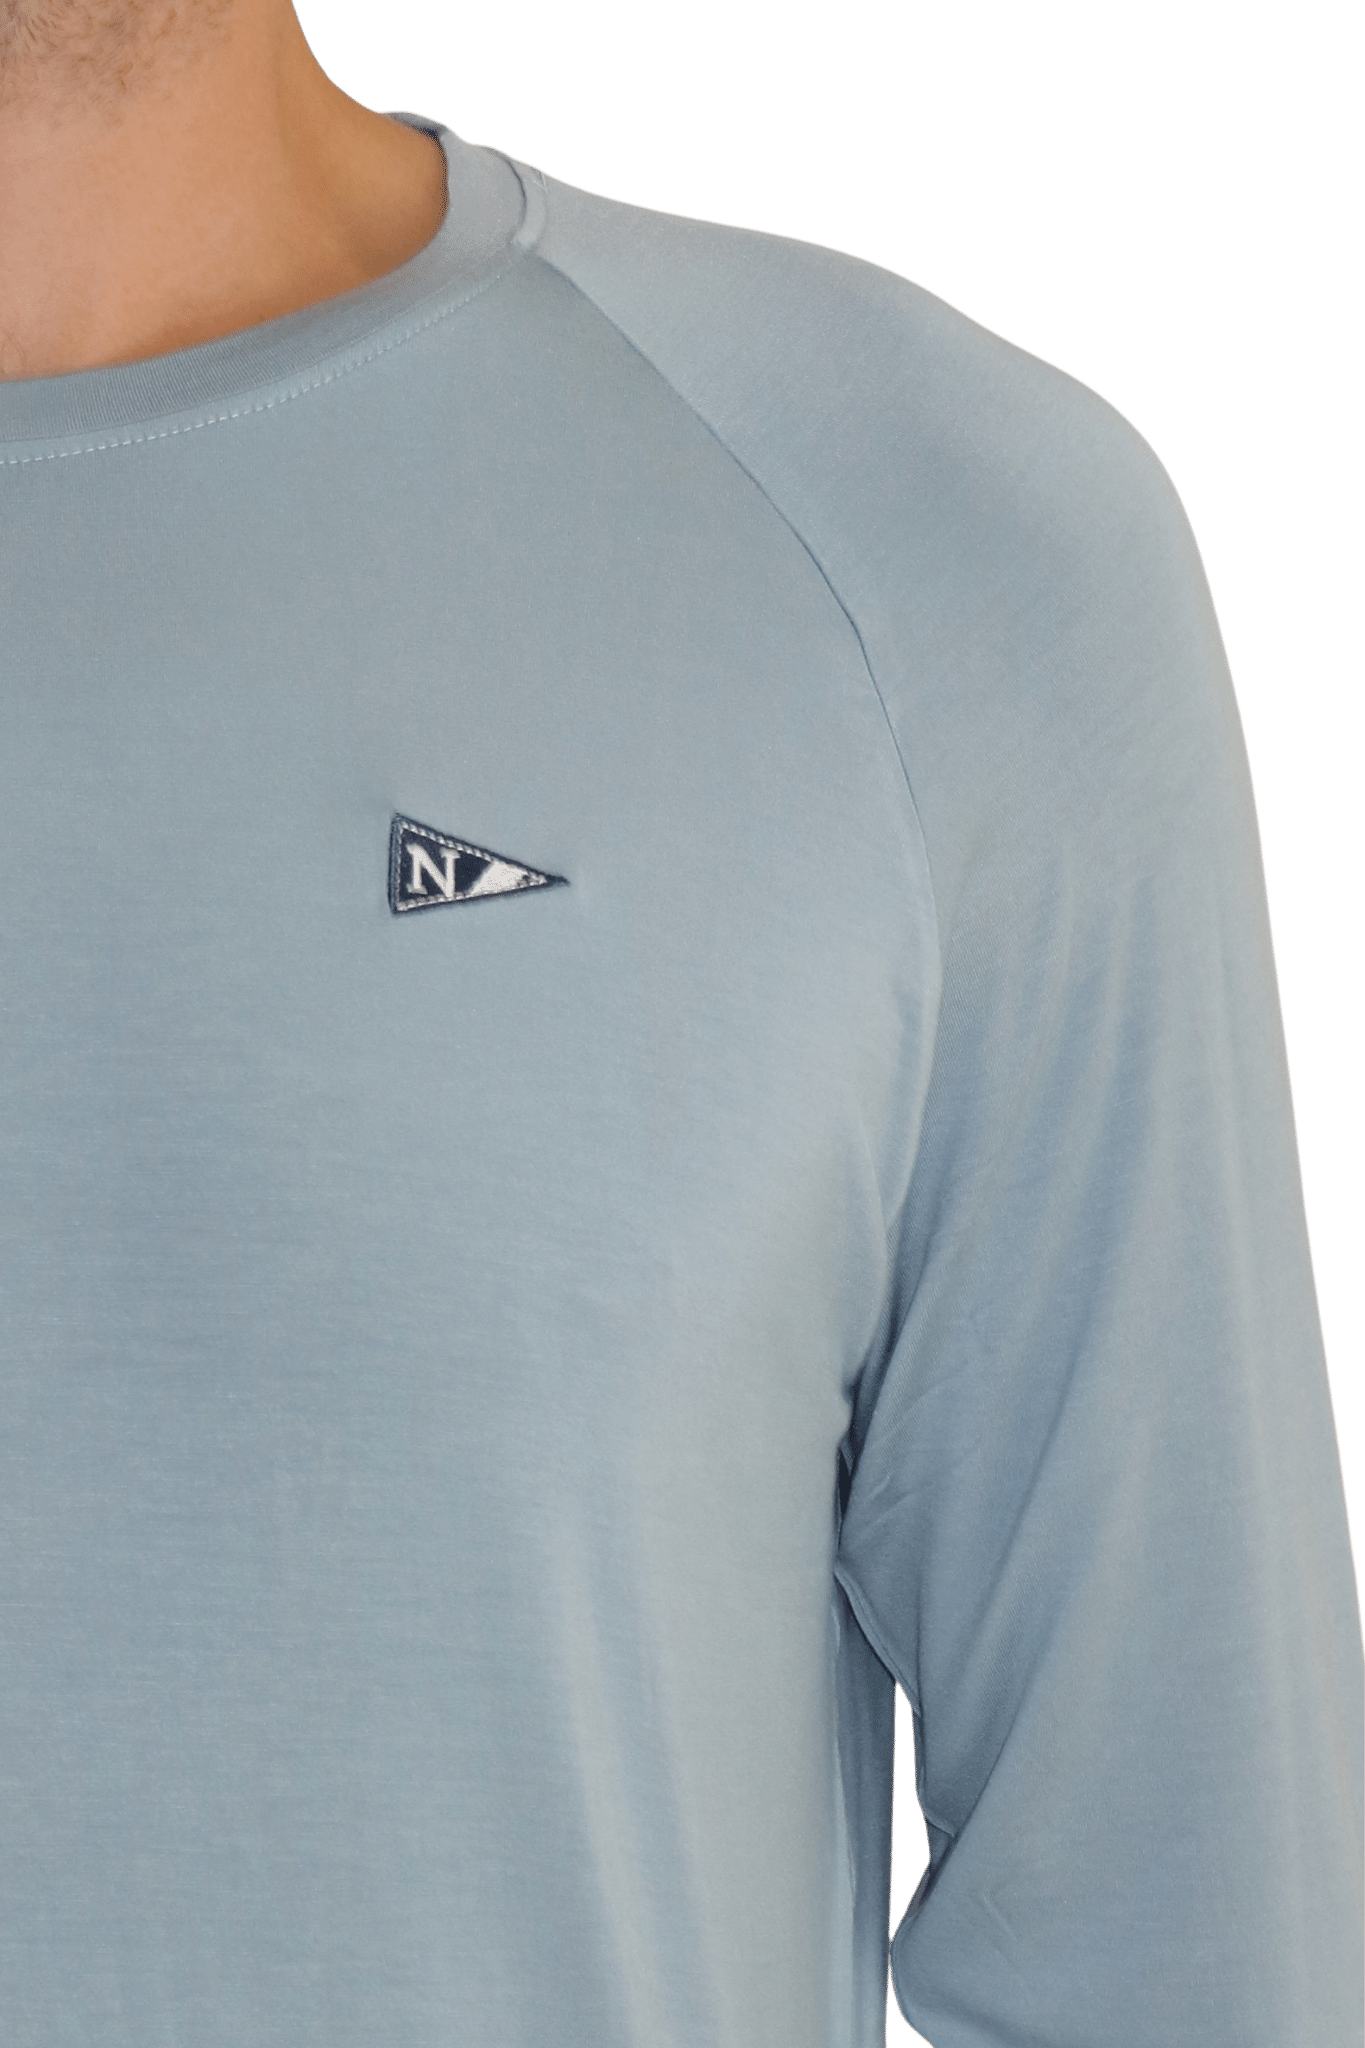 Front logo of the new light ocean blue icon long sleeve bamboo shirt with 35+ UPF sun protection.